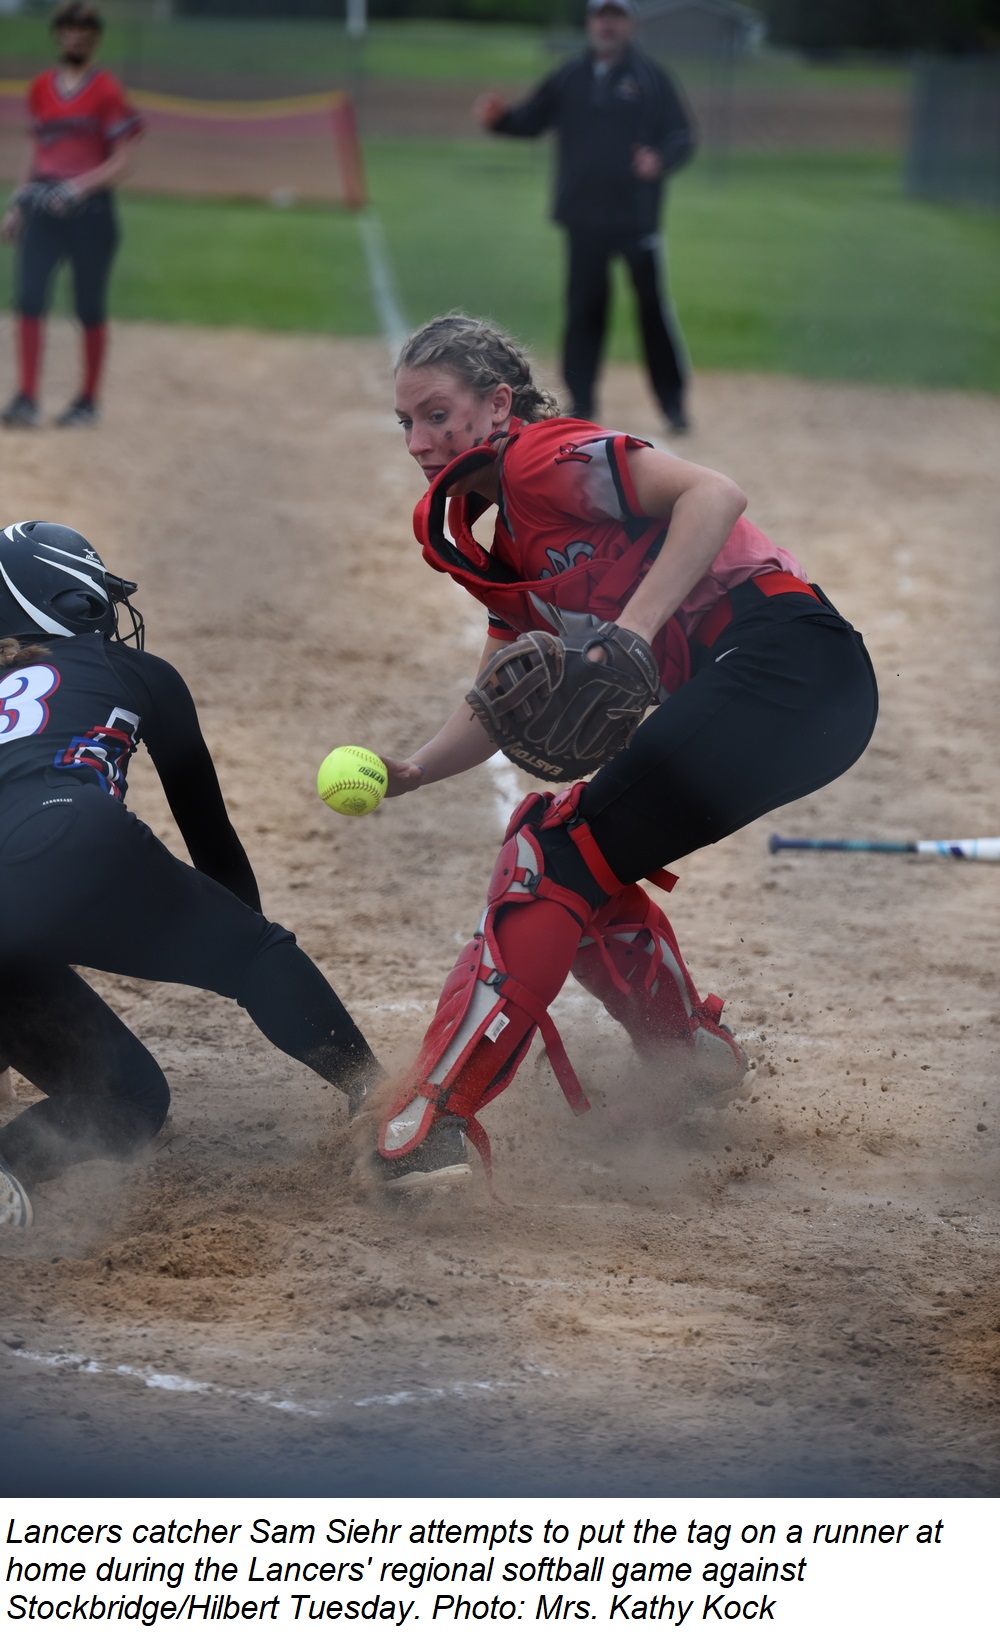 Catcher Sam Siehr attempts to make an out at home plate during the Lancers' regional softball game at Stockbridge Tuesday.